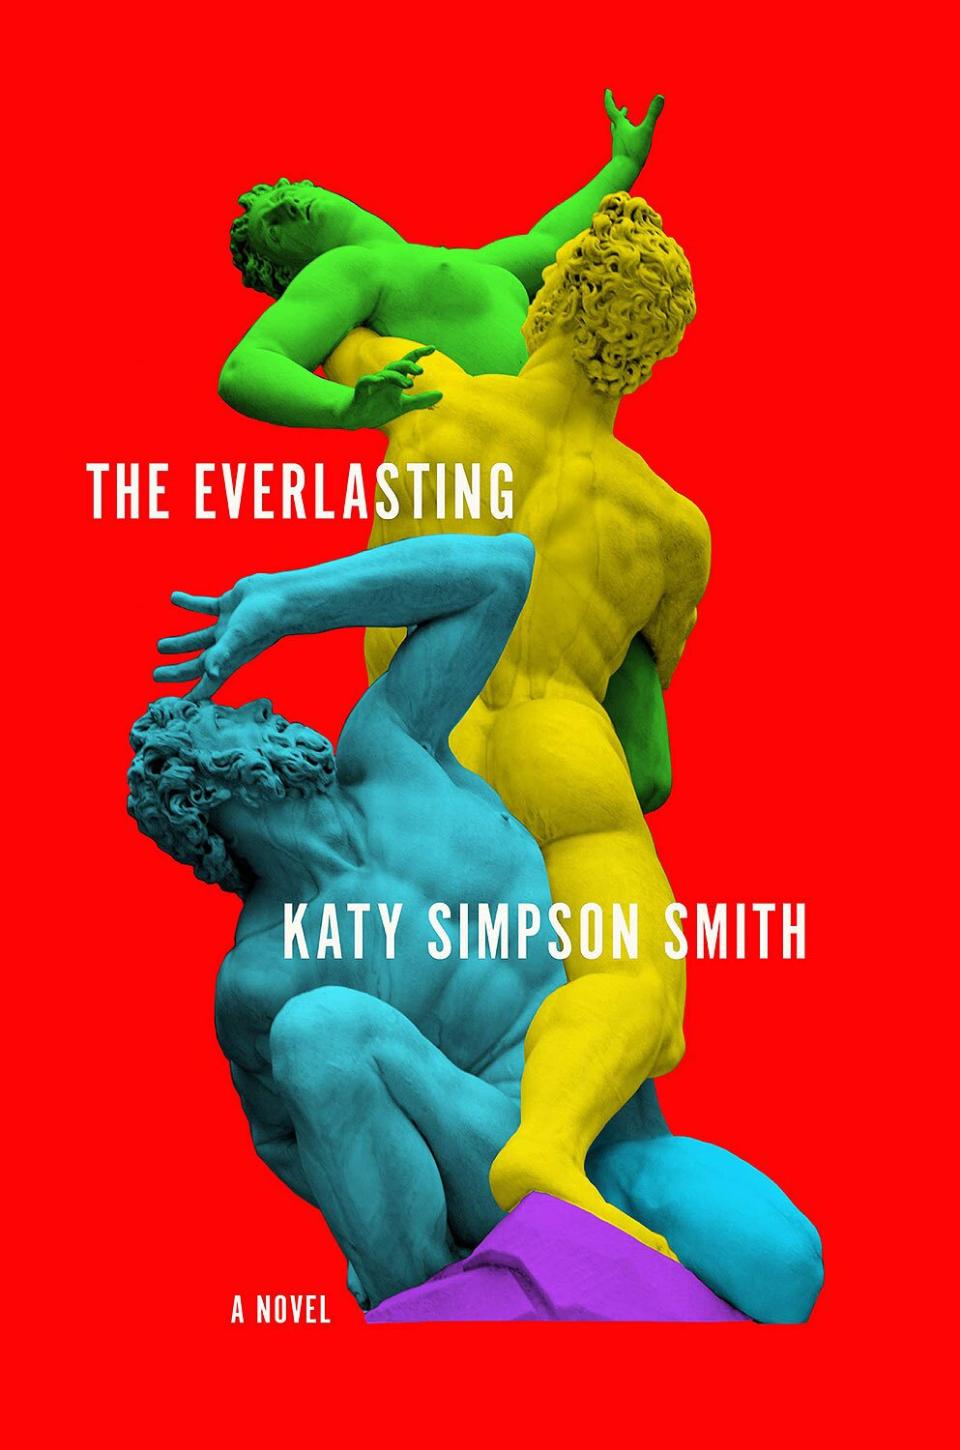 The Everlasting by Katy Simpson-Smith